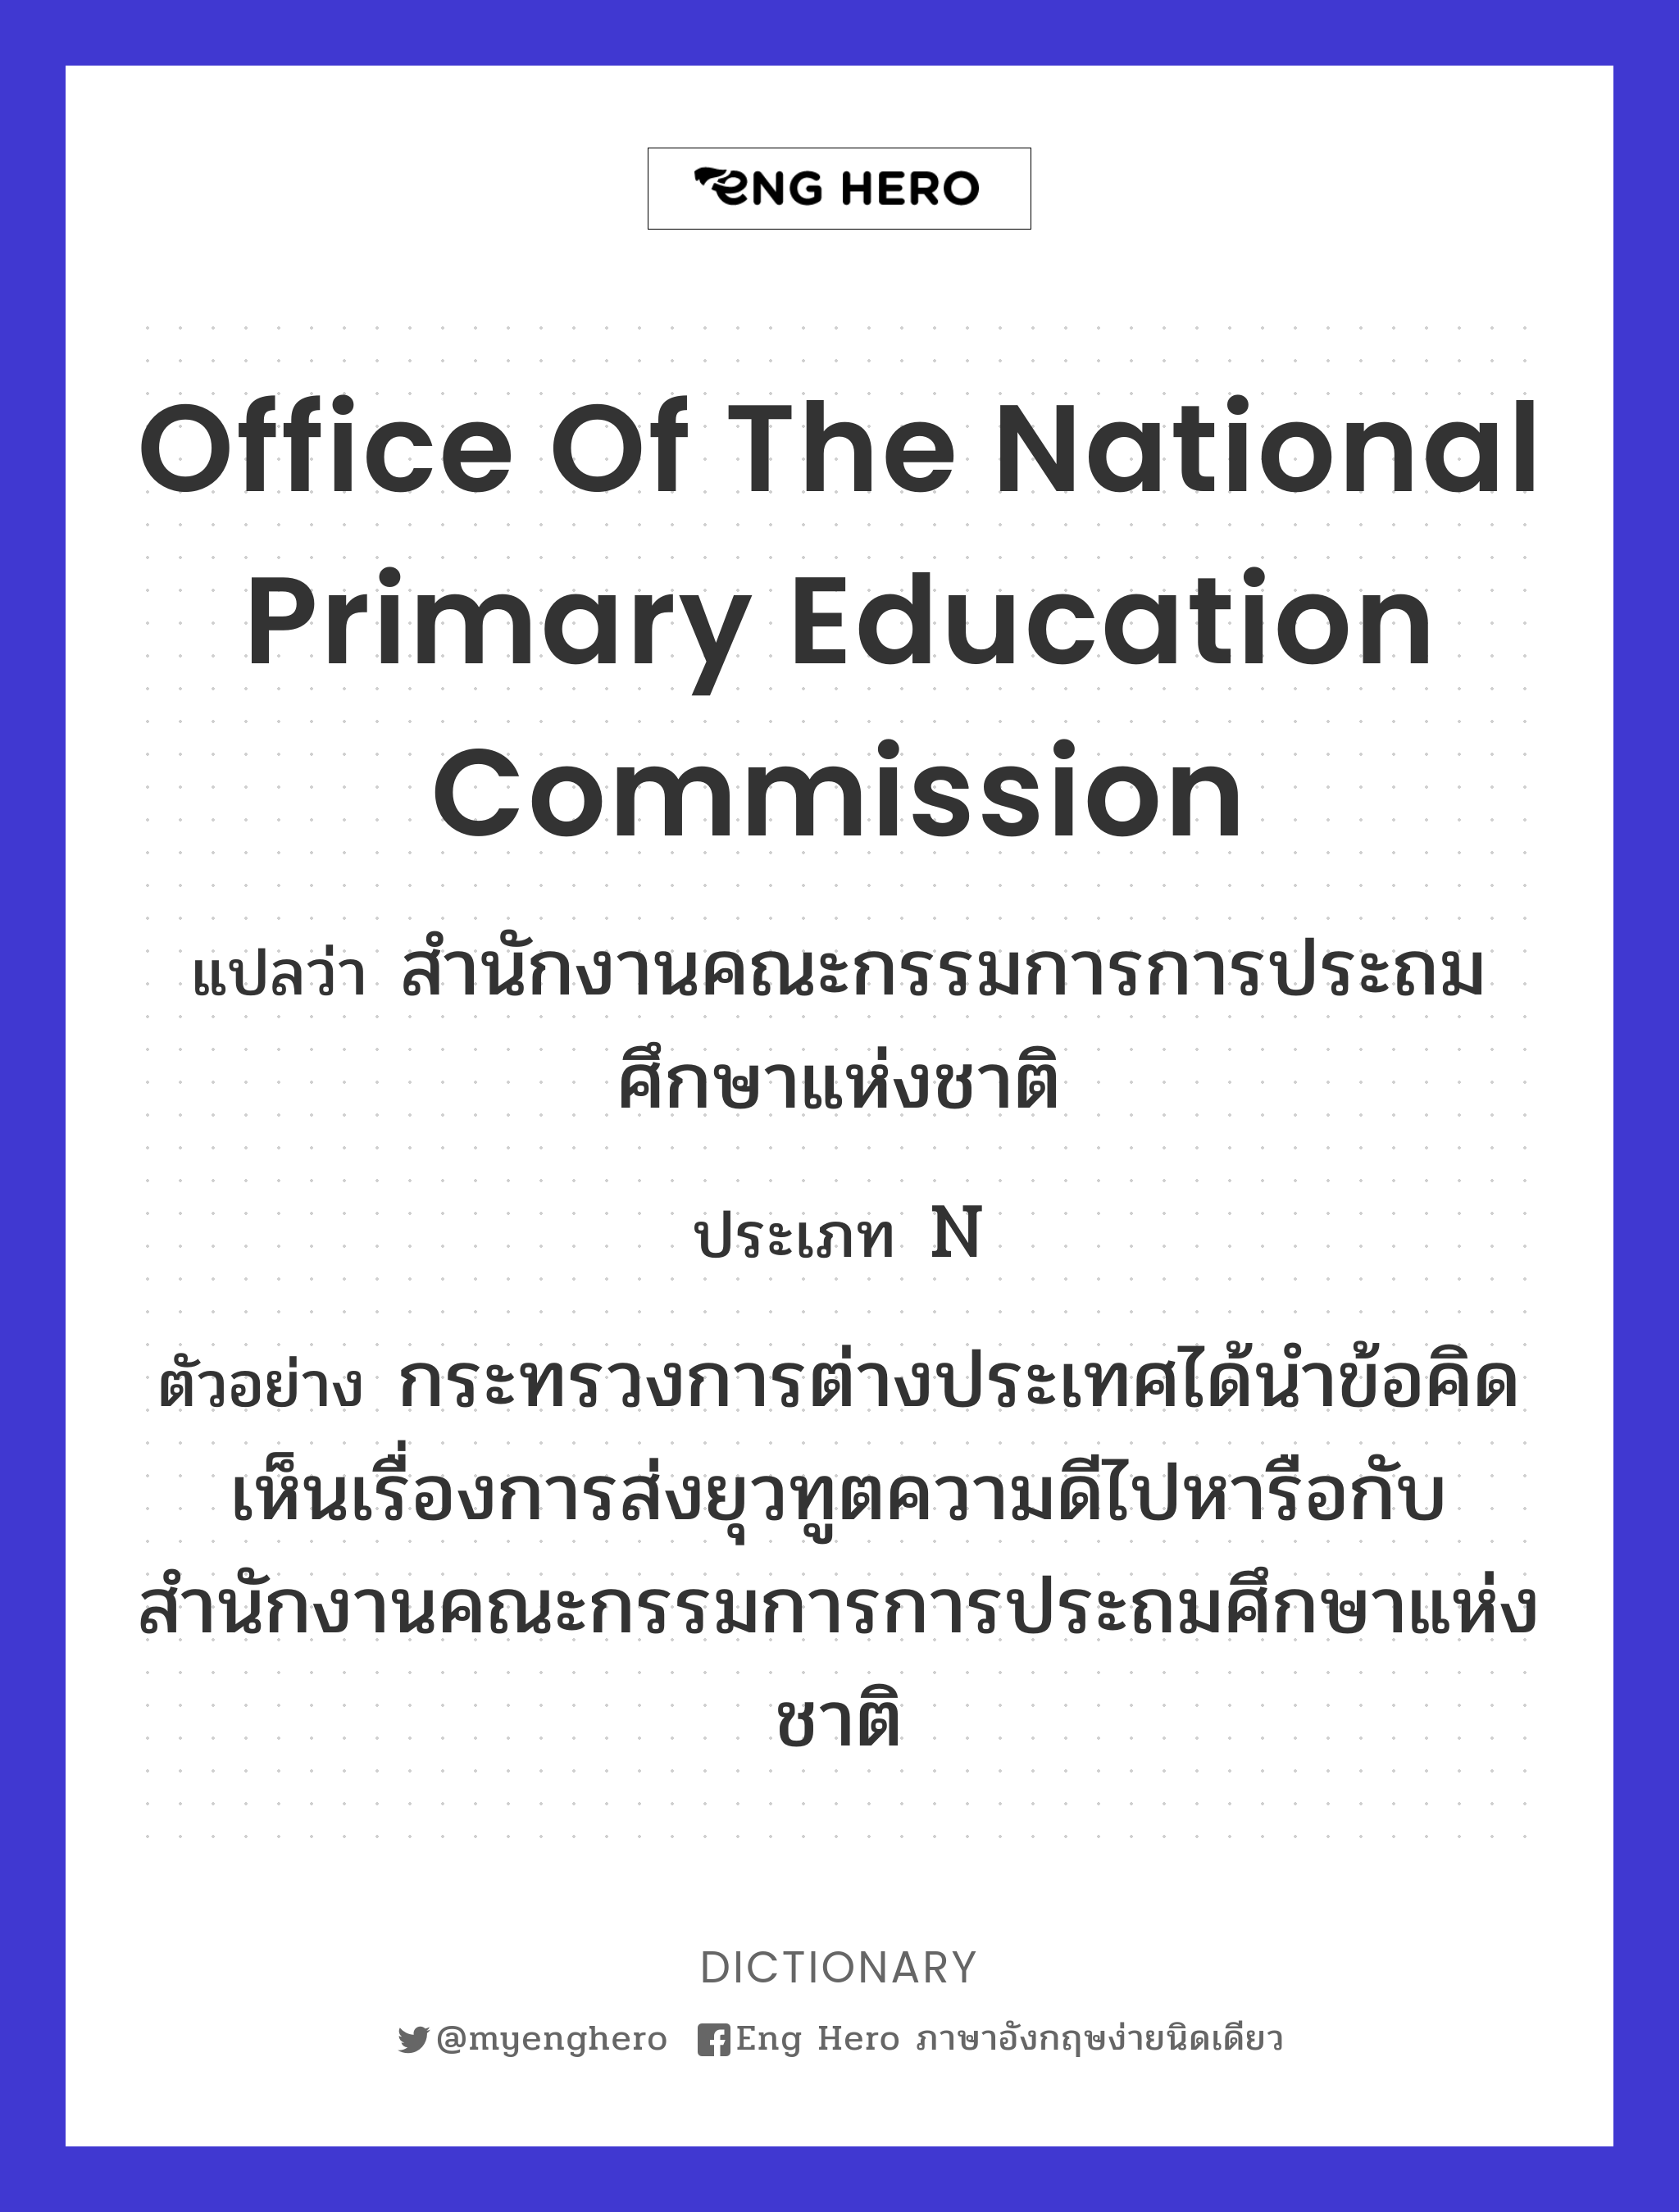 Office of the National Primary Education Commission